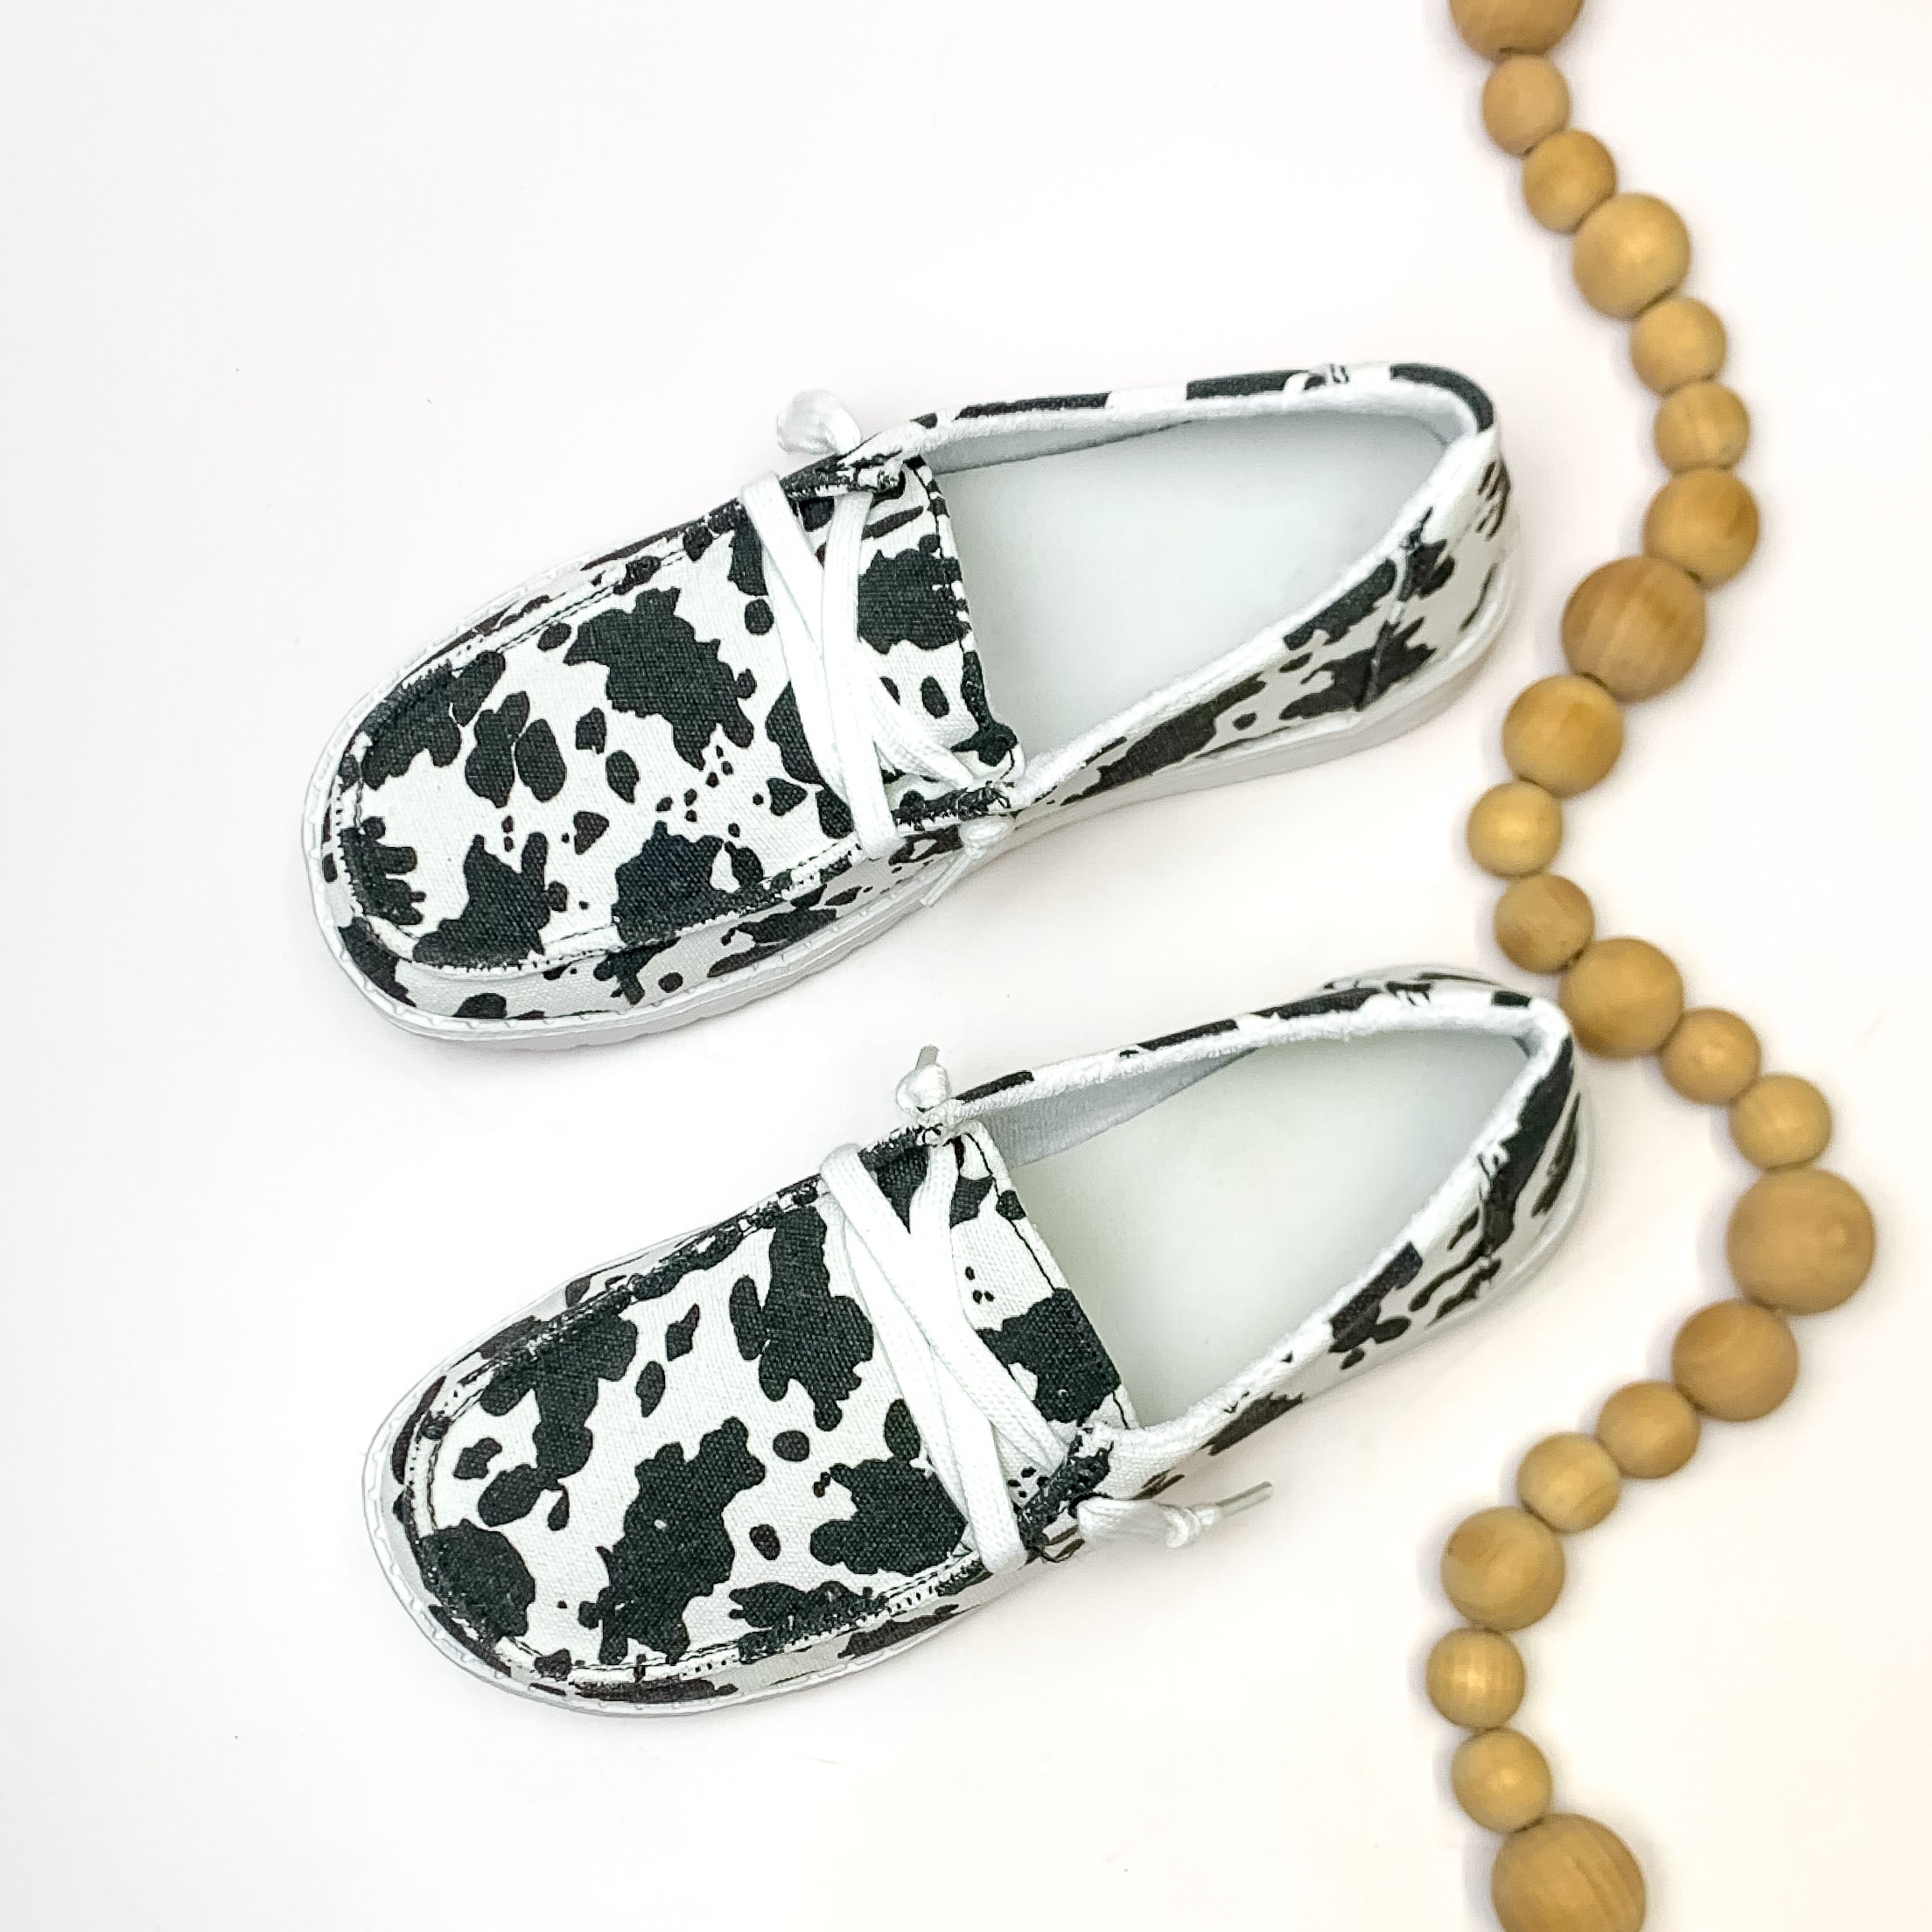 Very G | Have To Run Cow Print Slip On Loafers with Laces in Black - Giddy Up Glamour Boutique